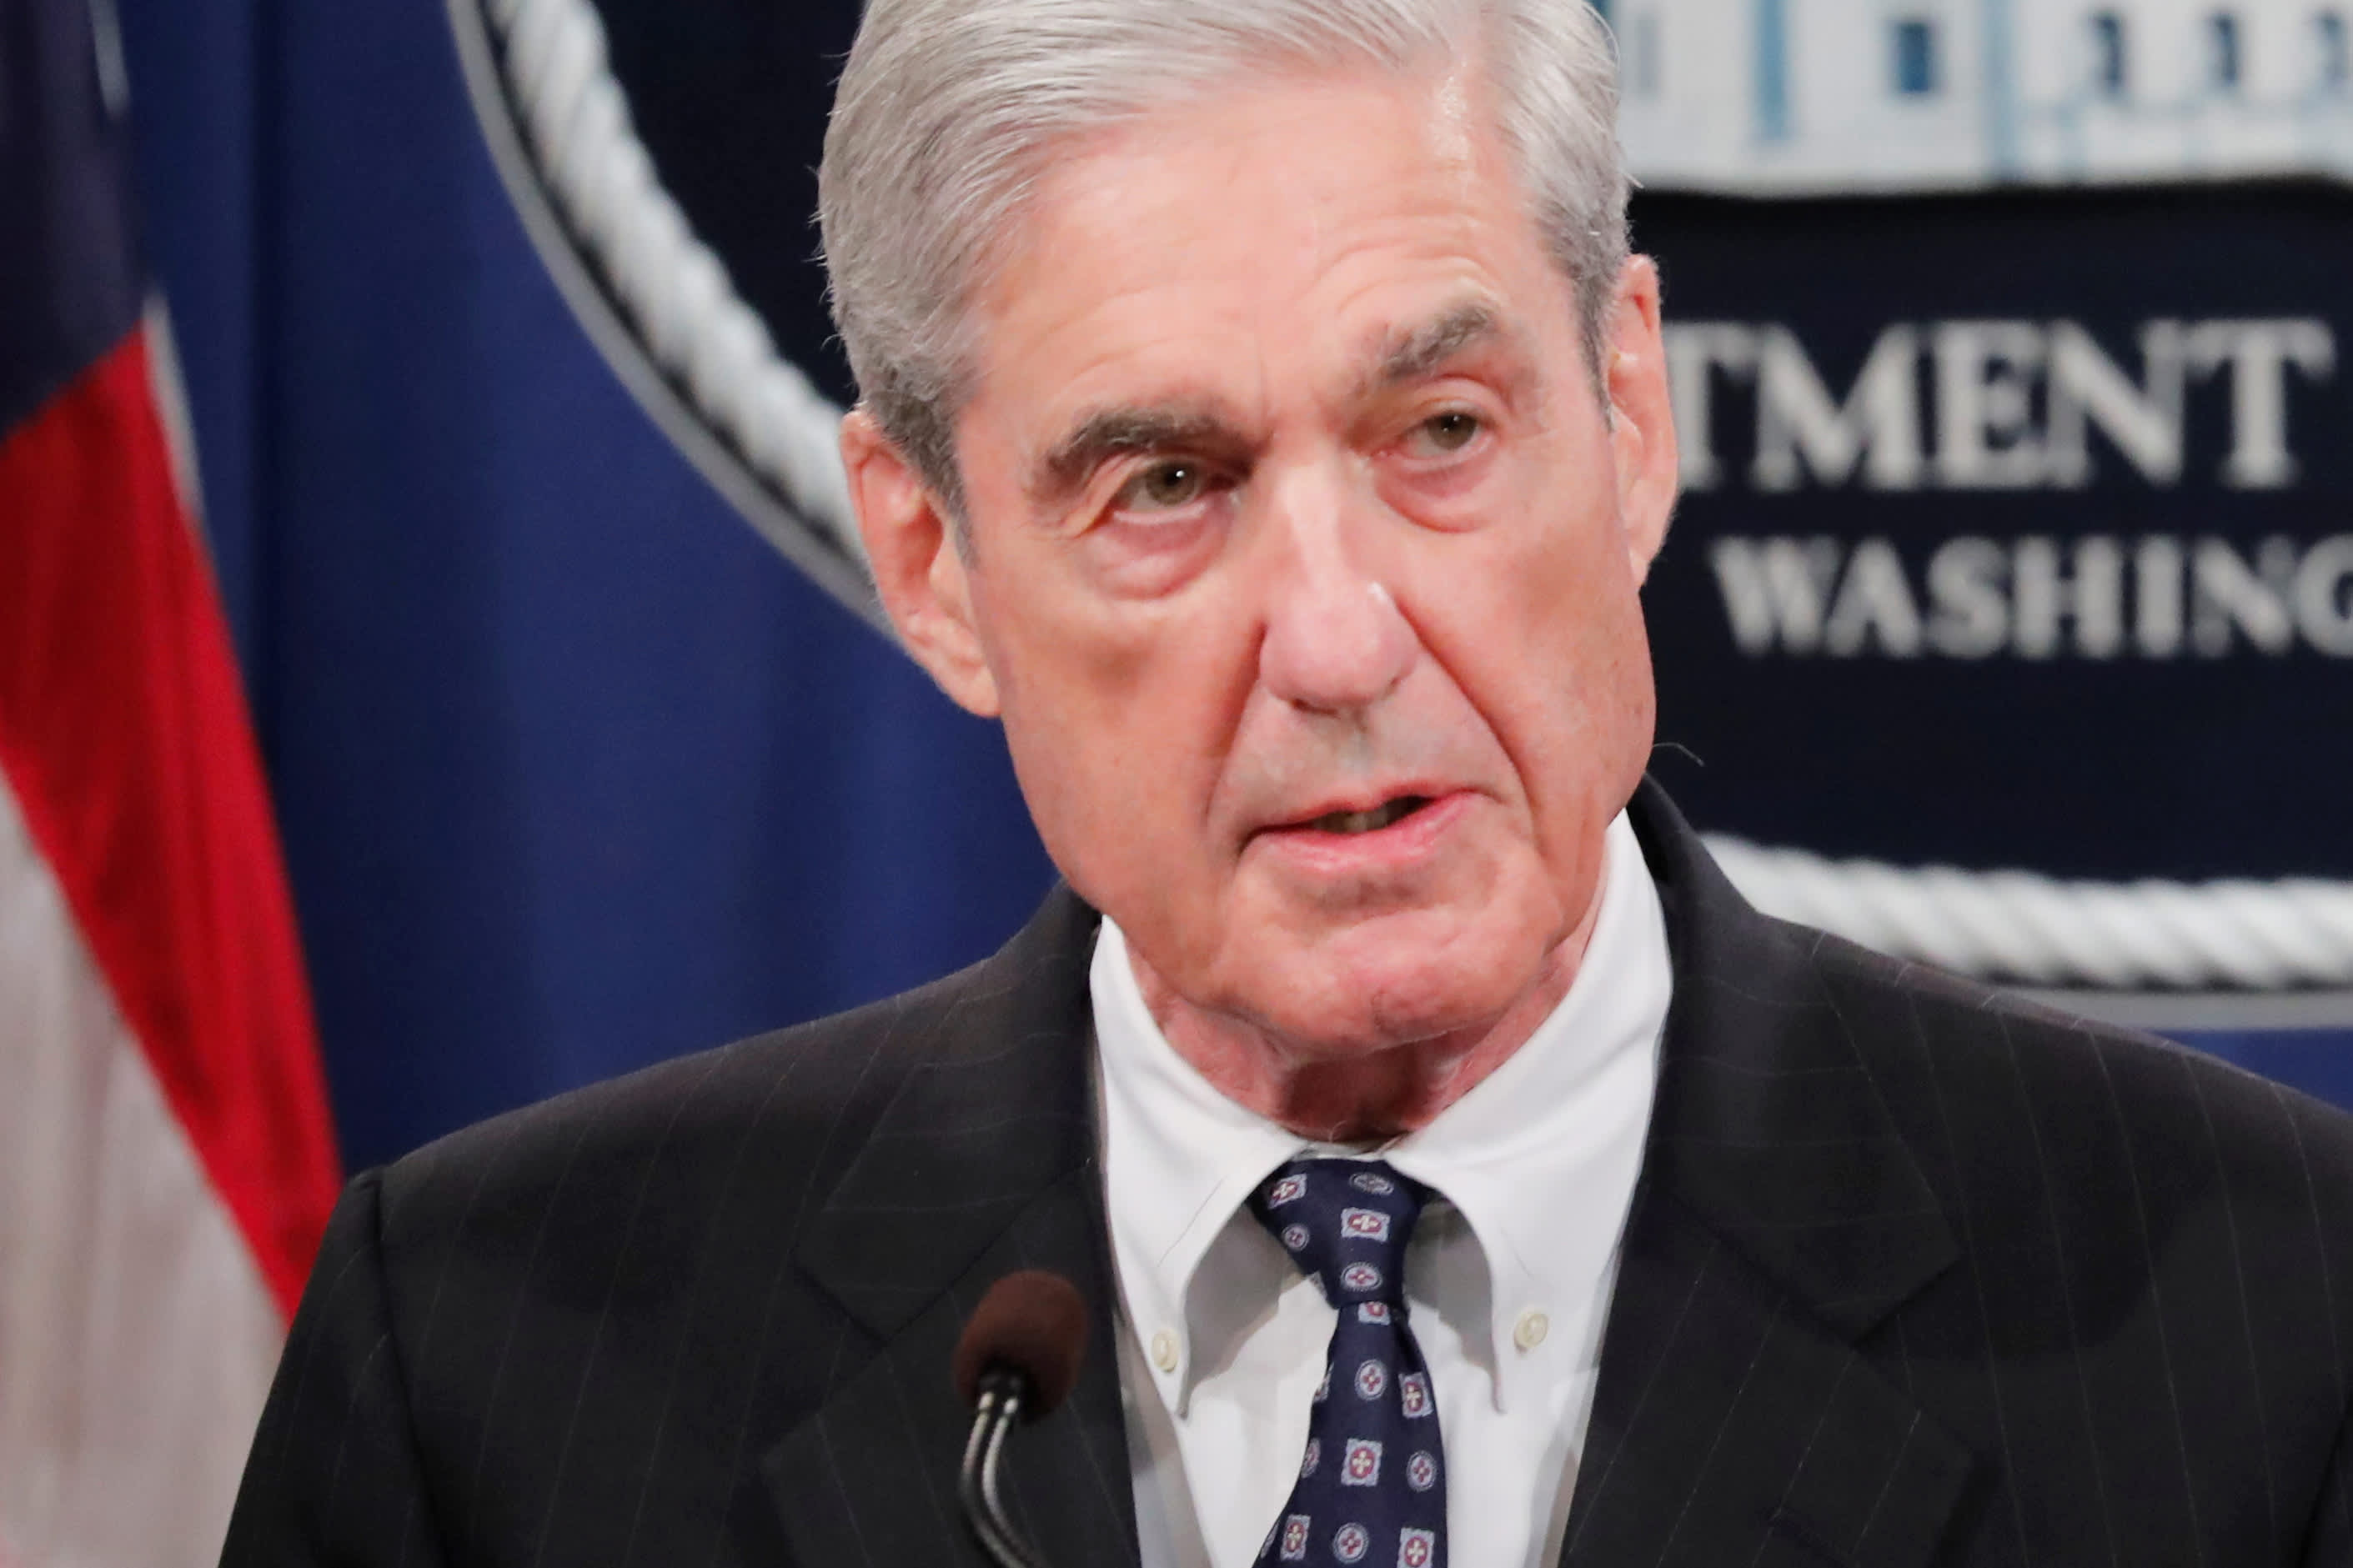 Here's how lawmakers plan to grill Mueller during his public testimony